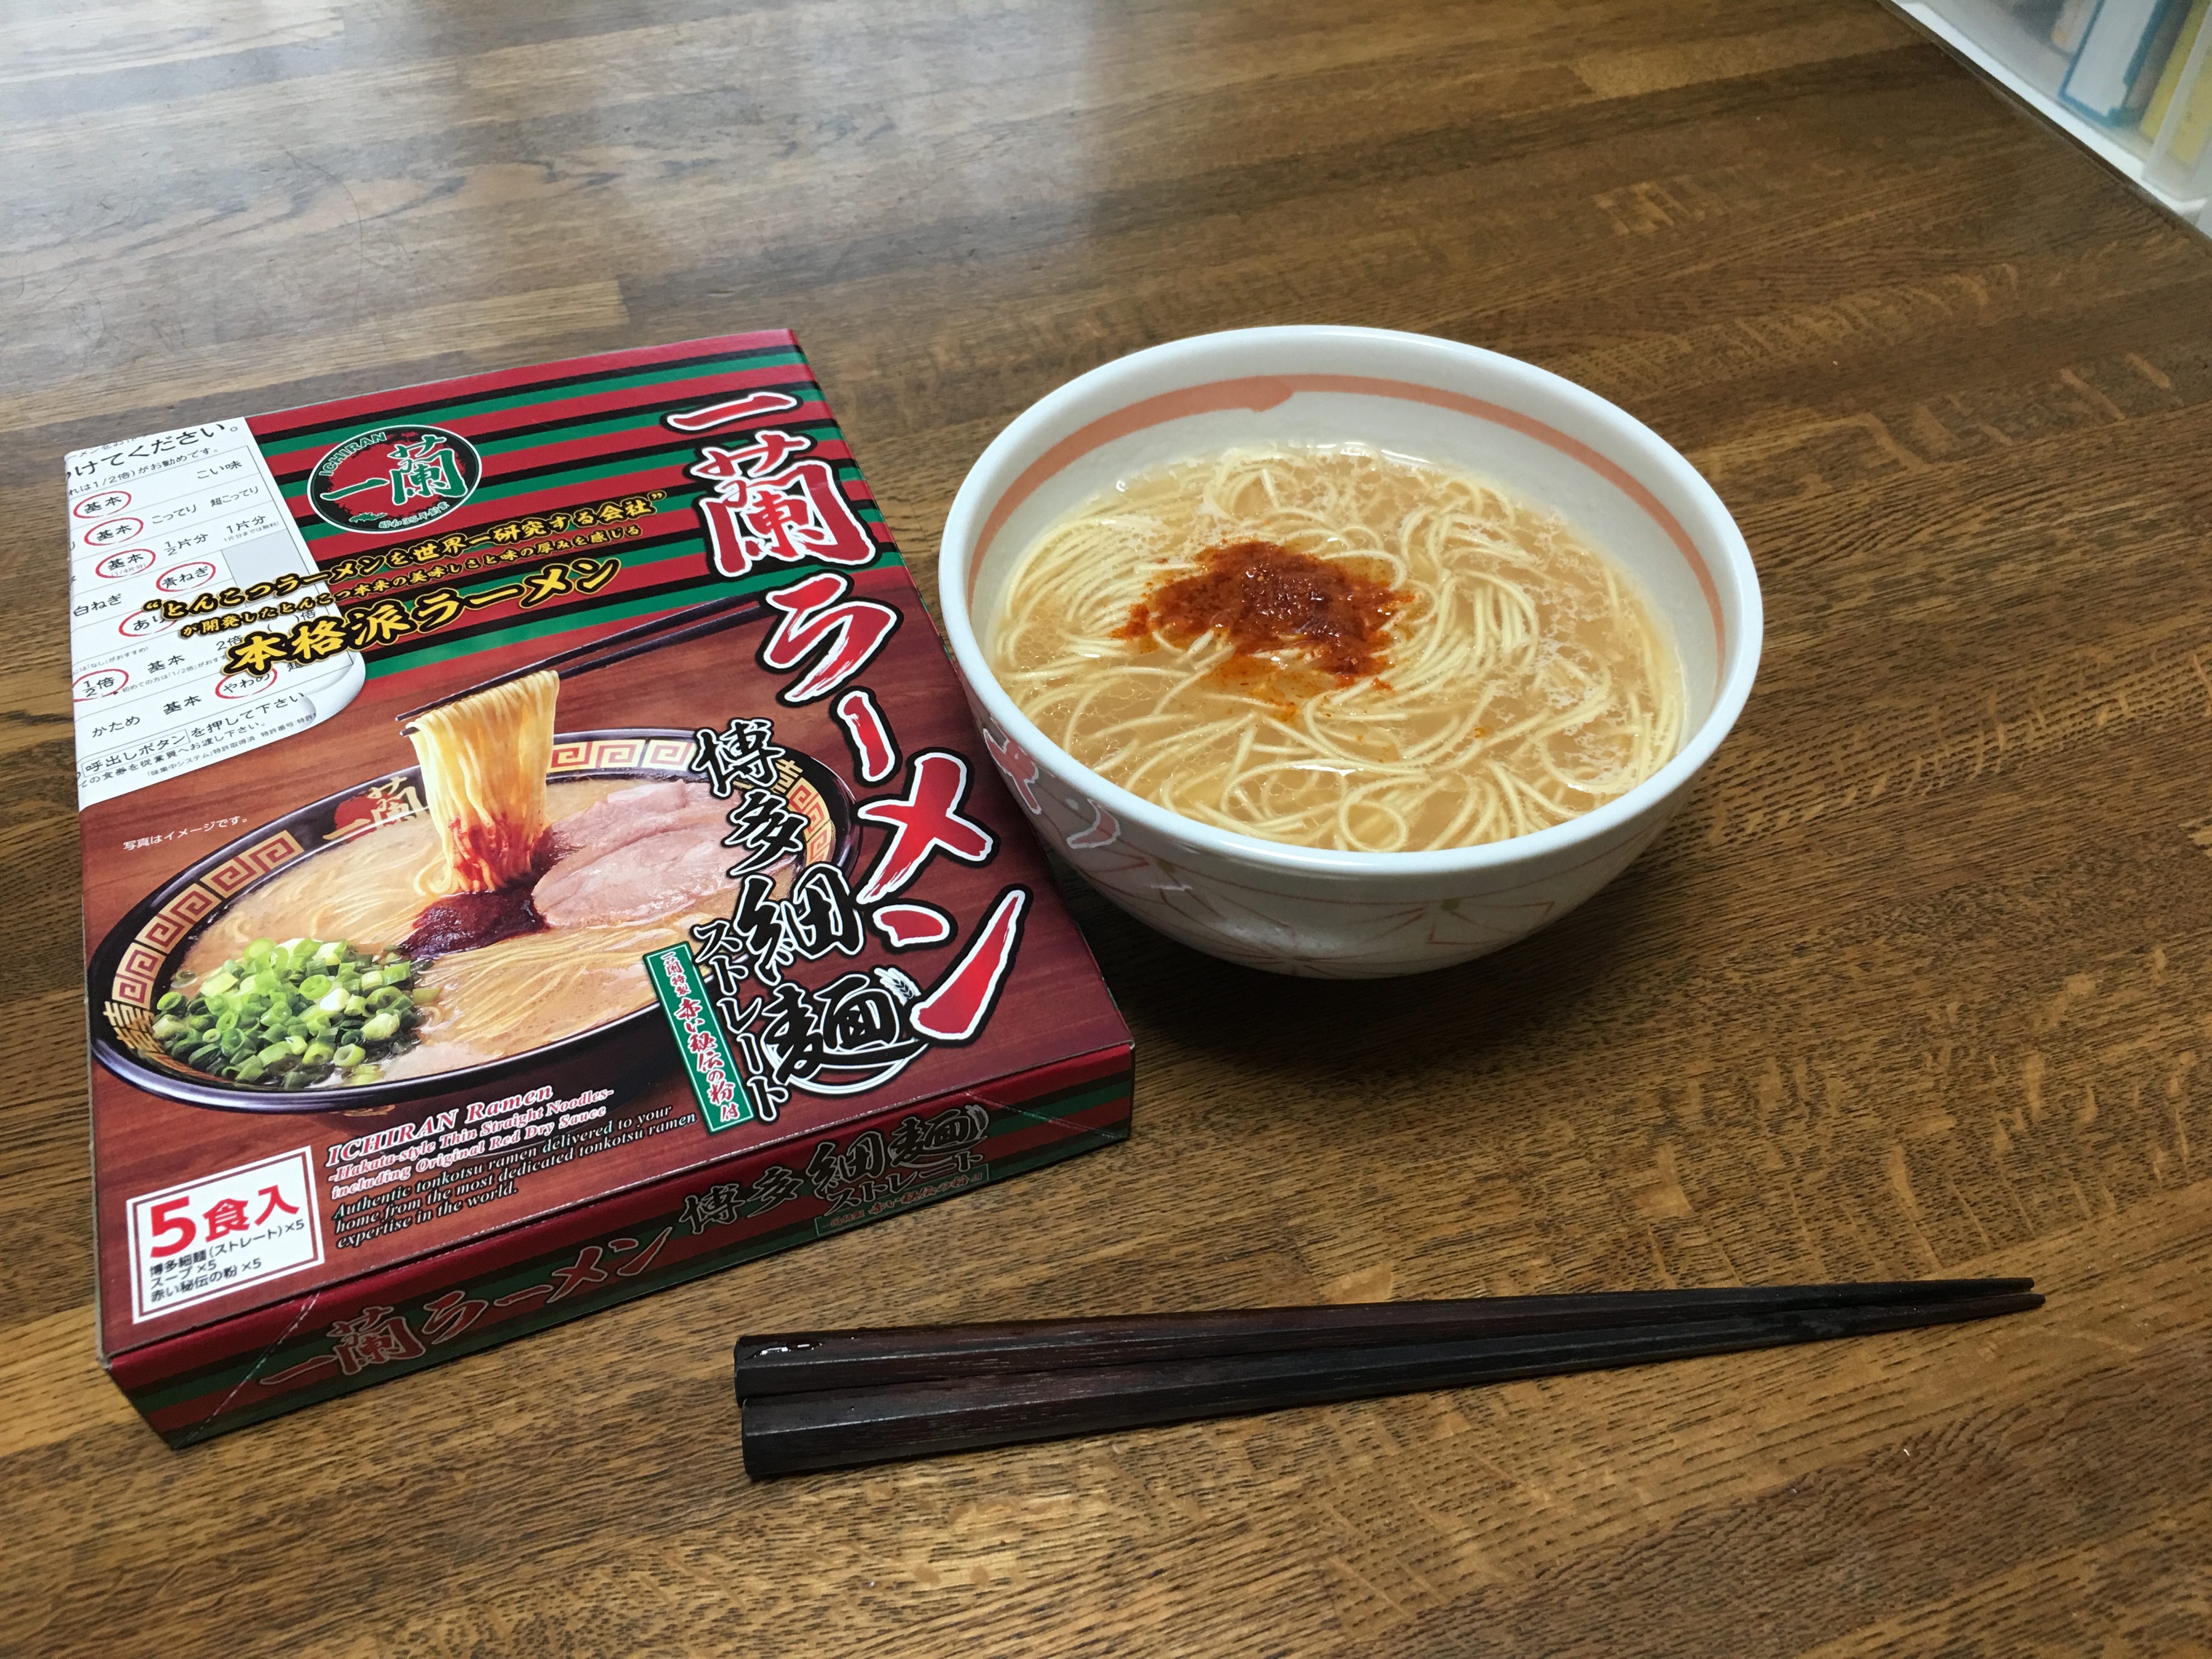 Knurre sofistikeret medaljevinder All About Ichiran Hakata Tonkotsu Ramen Instant Noodles - Recommendation of  Unique Japanese Products and Culture